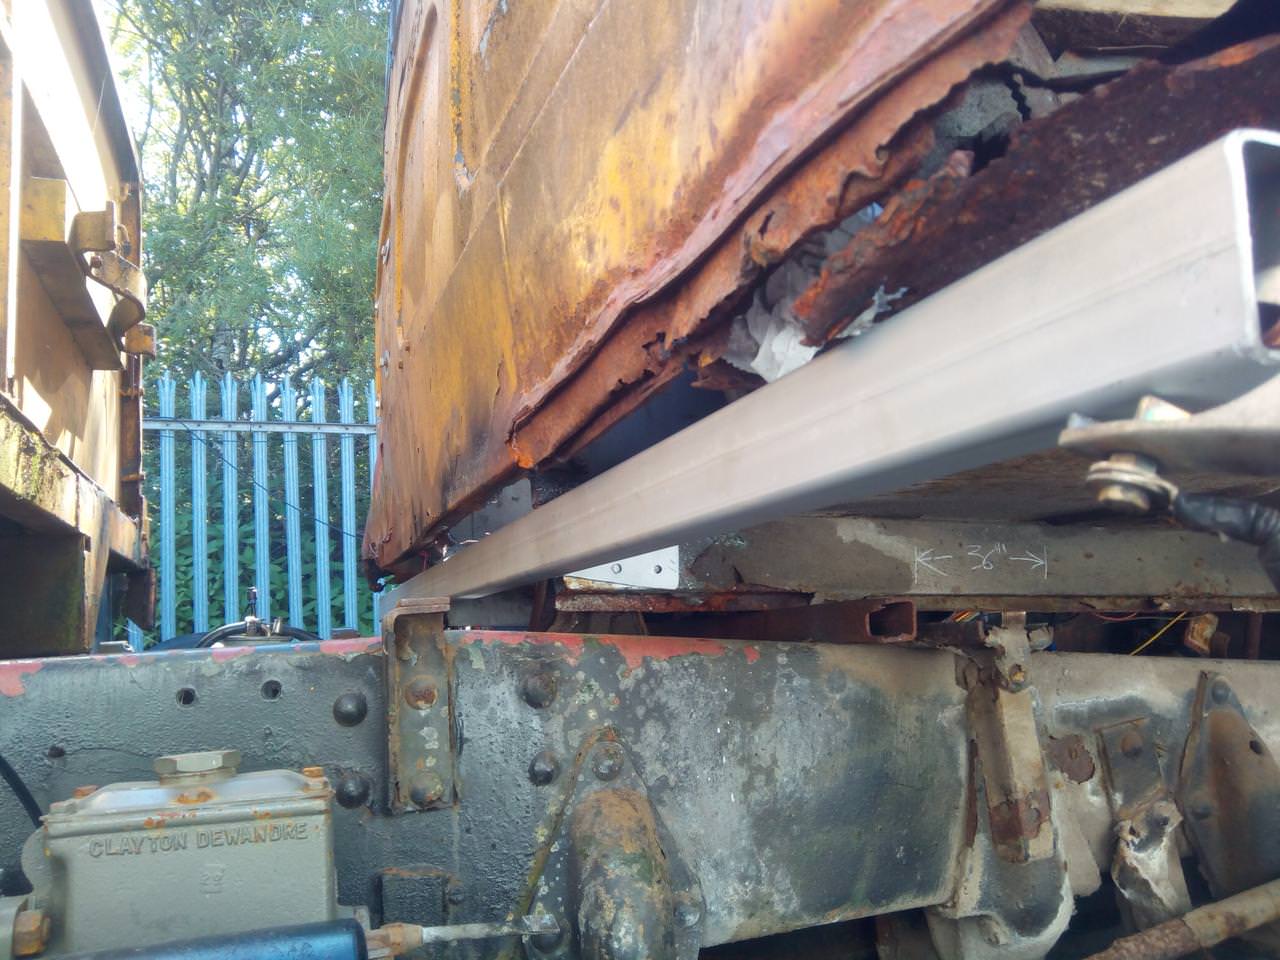 The square tubing pushed up into the back of the cab, with the
brackets either side of the cab frame rails. On the side of the frame
rail is chalked the measurement of 36 inches.